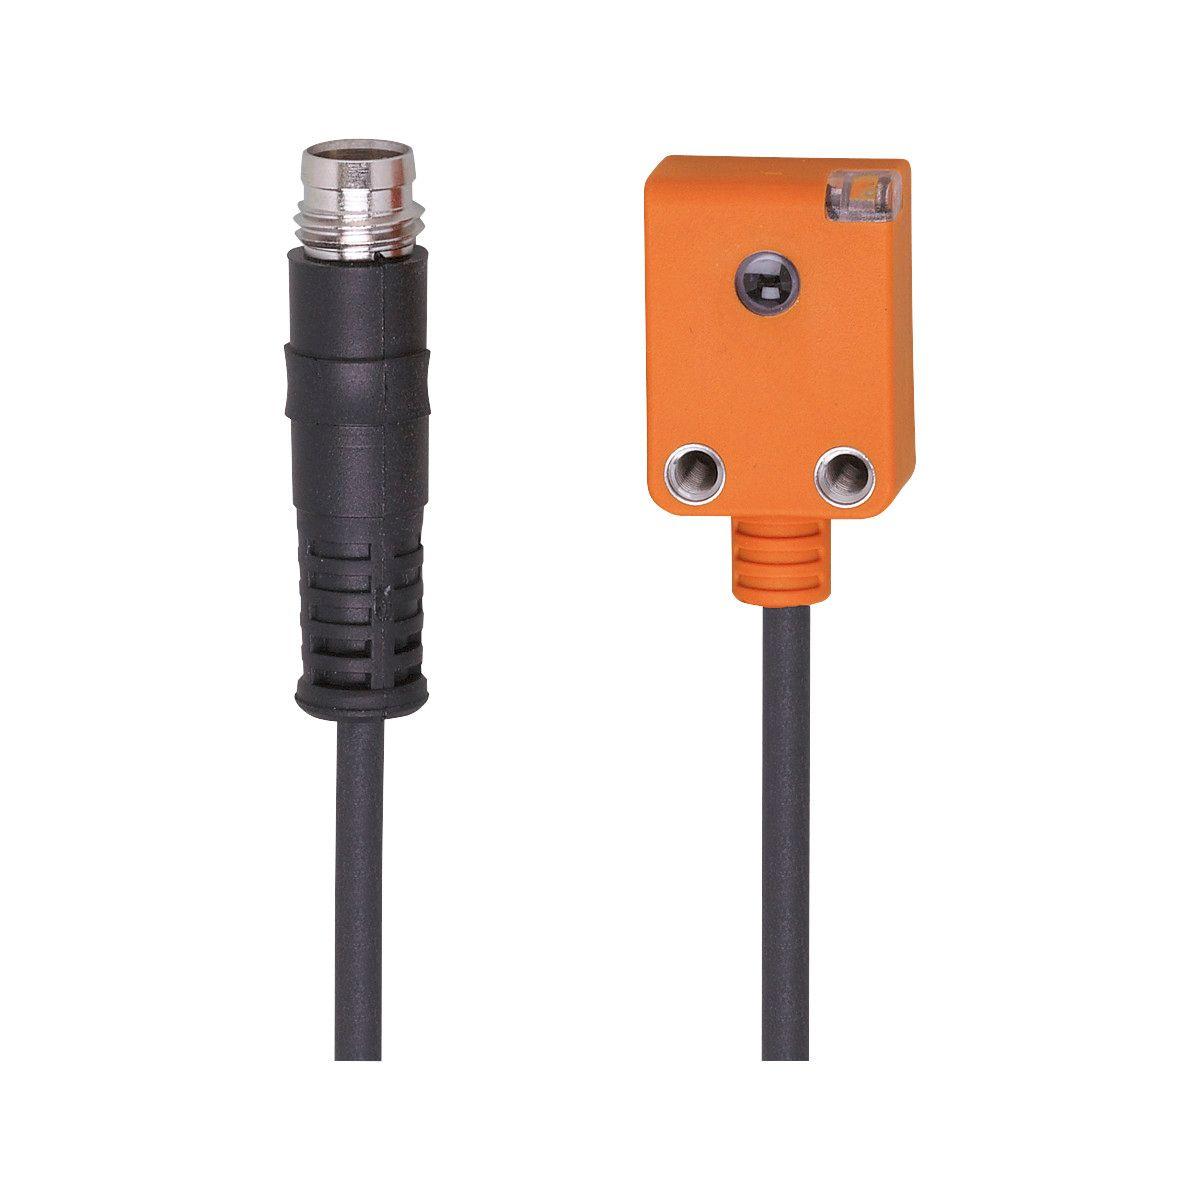 ifm Electronic O7S200 Through-beam sensor transmitter, Particularly small housing for use where space is restricted, Type of light: red light, Housing: rectangular, Dimensions [mm]: 20.3 x 15 x 9, Function principle: Through-beam sensor